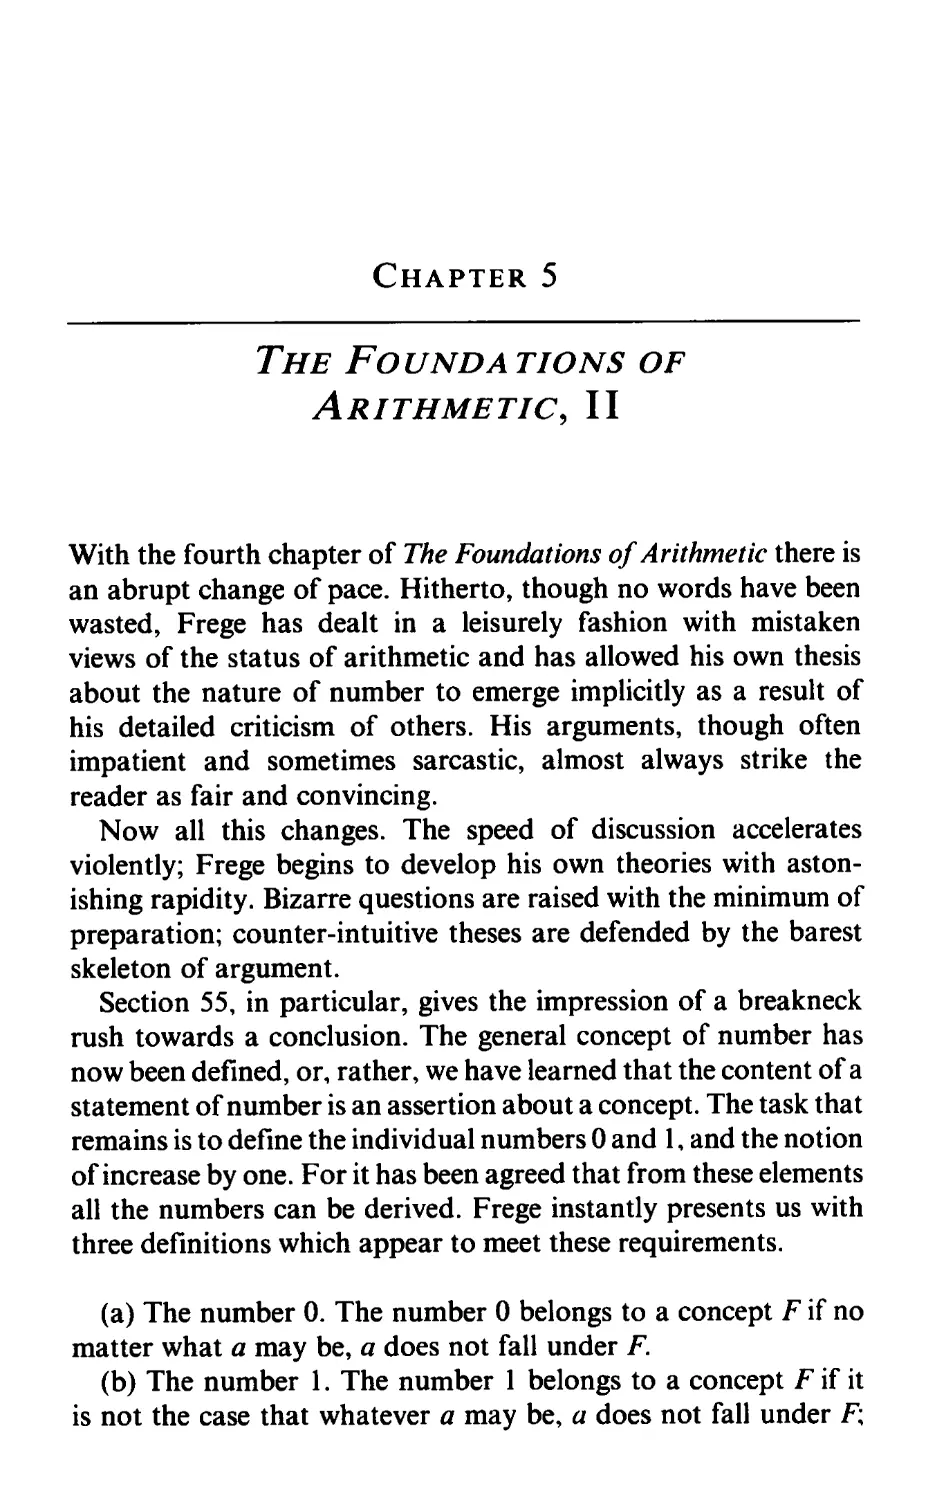 5 The Foundations of Arithmetic, II